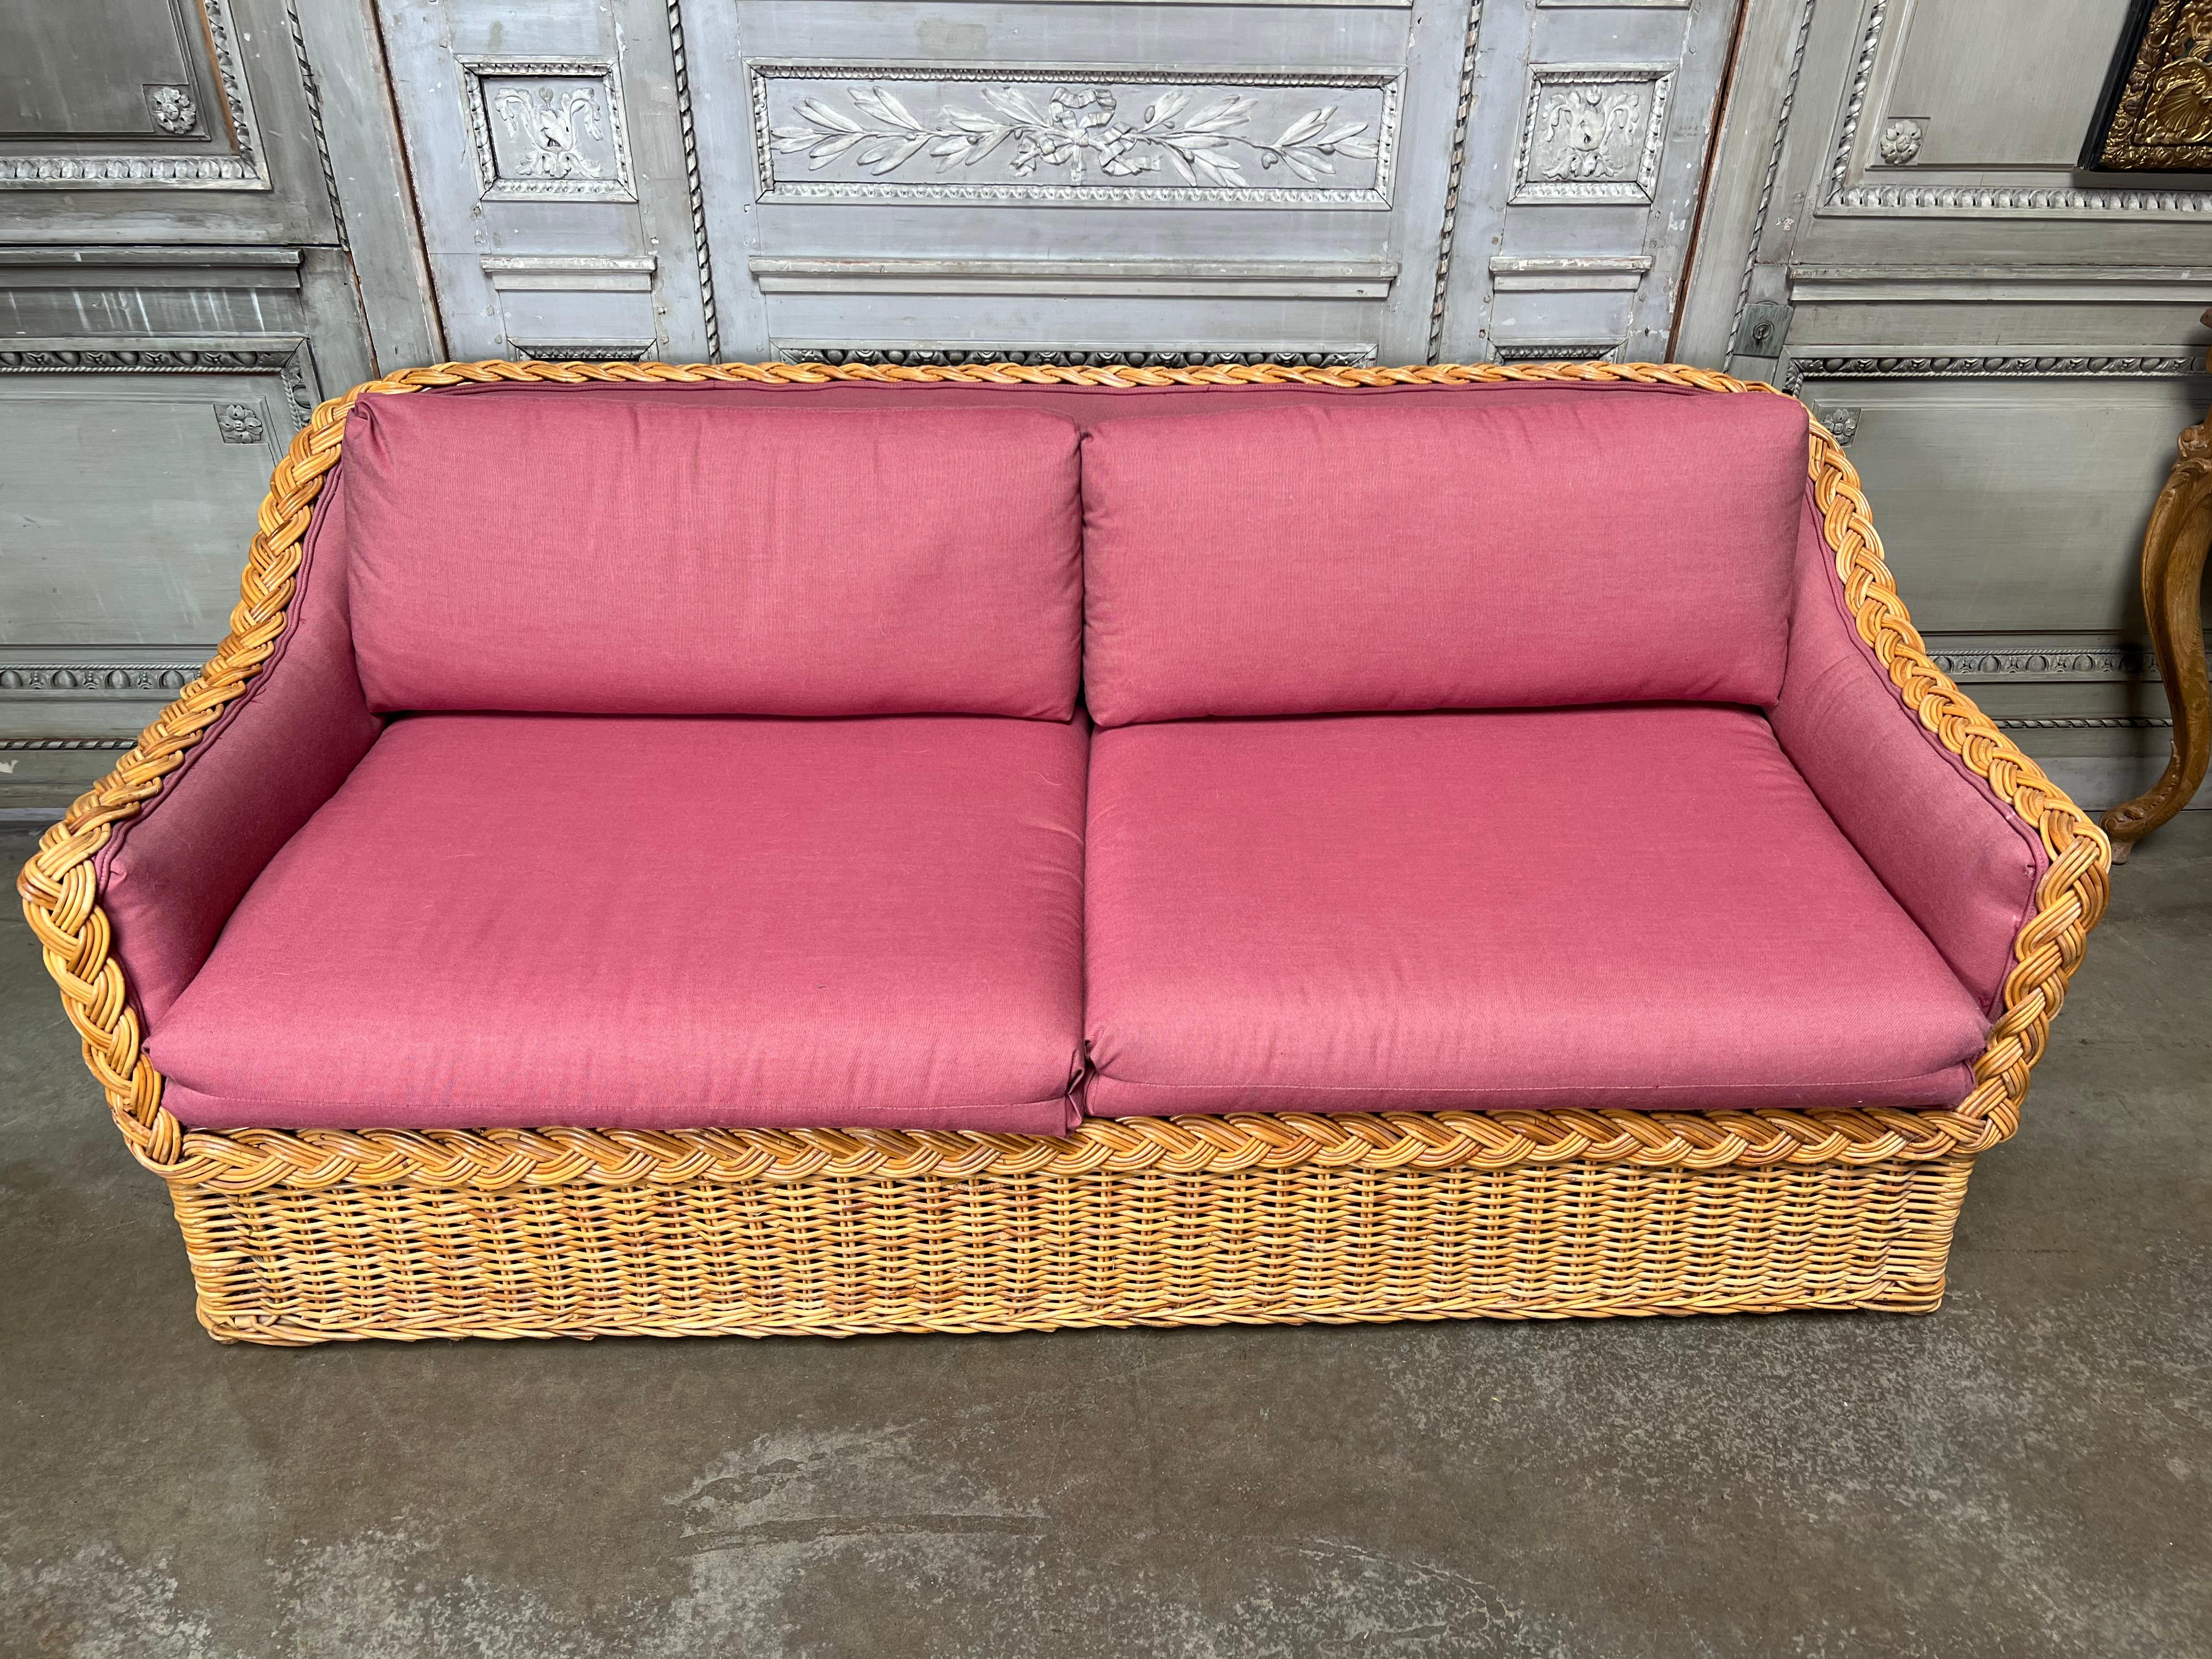 Organic Modern Wicker Works Sofa from the 1980s